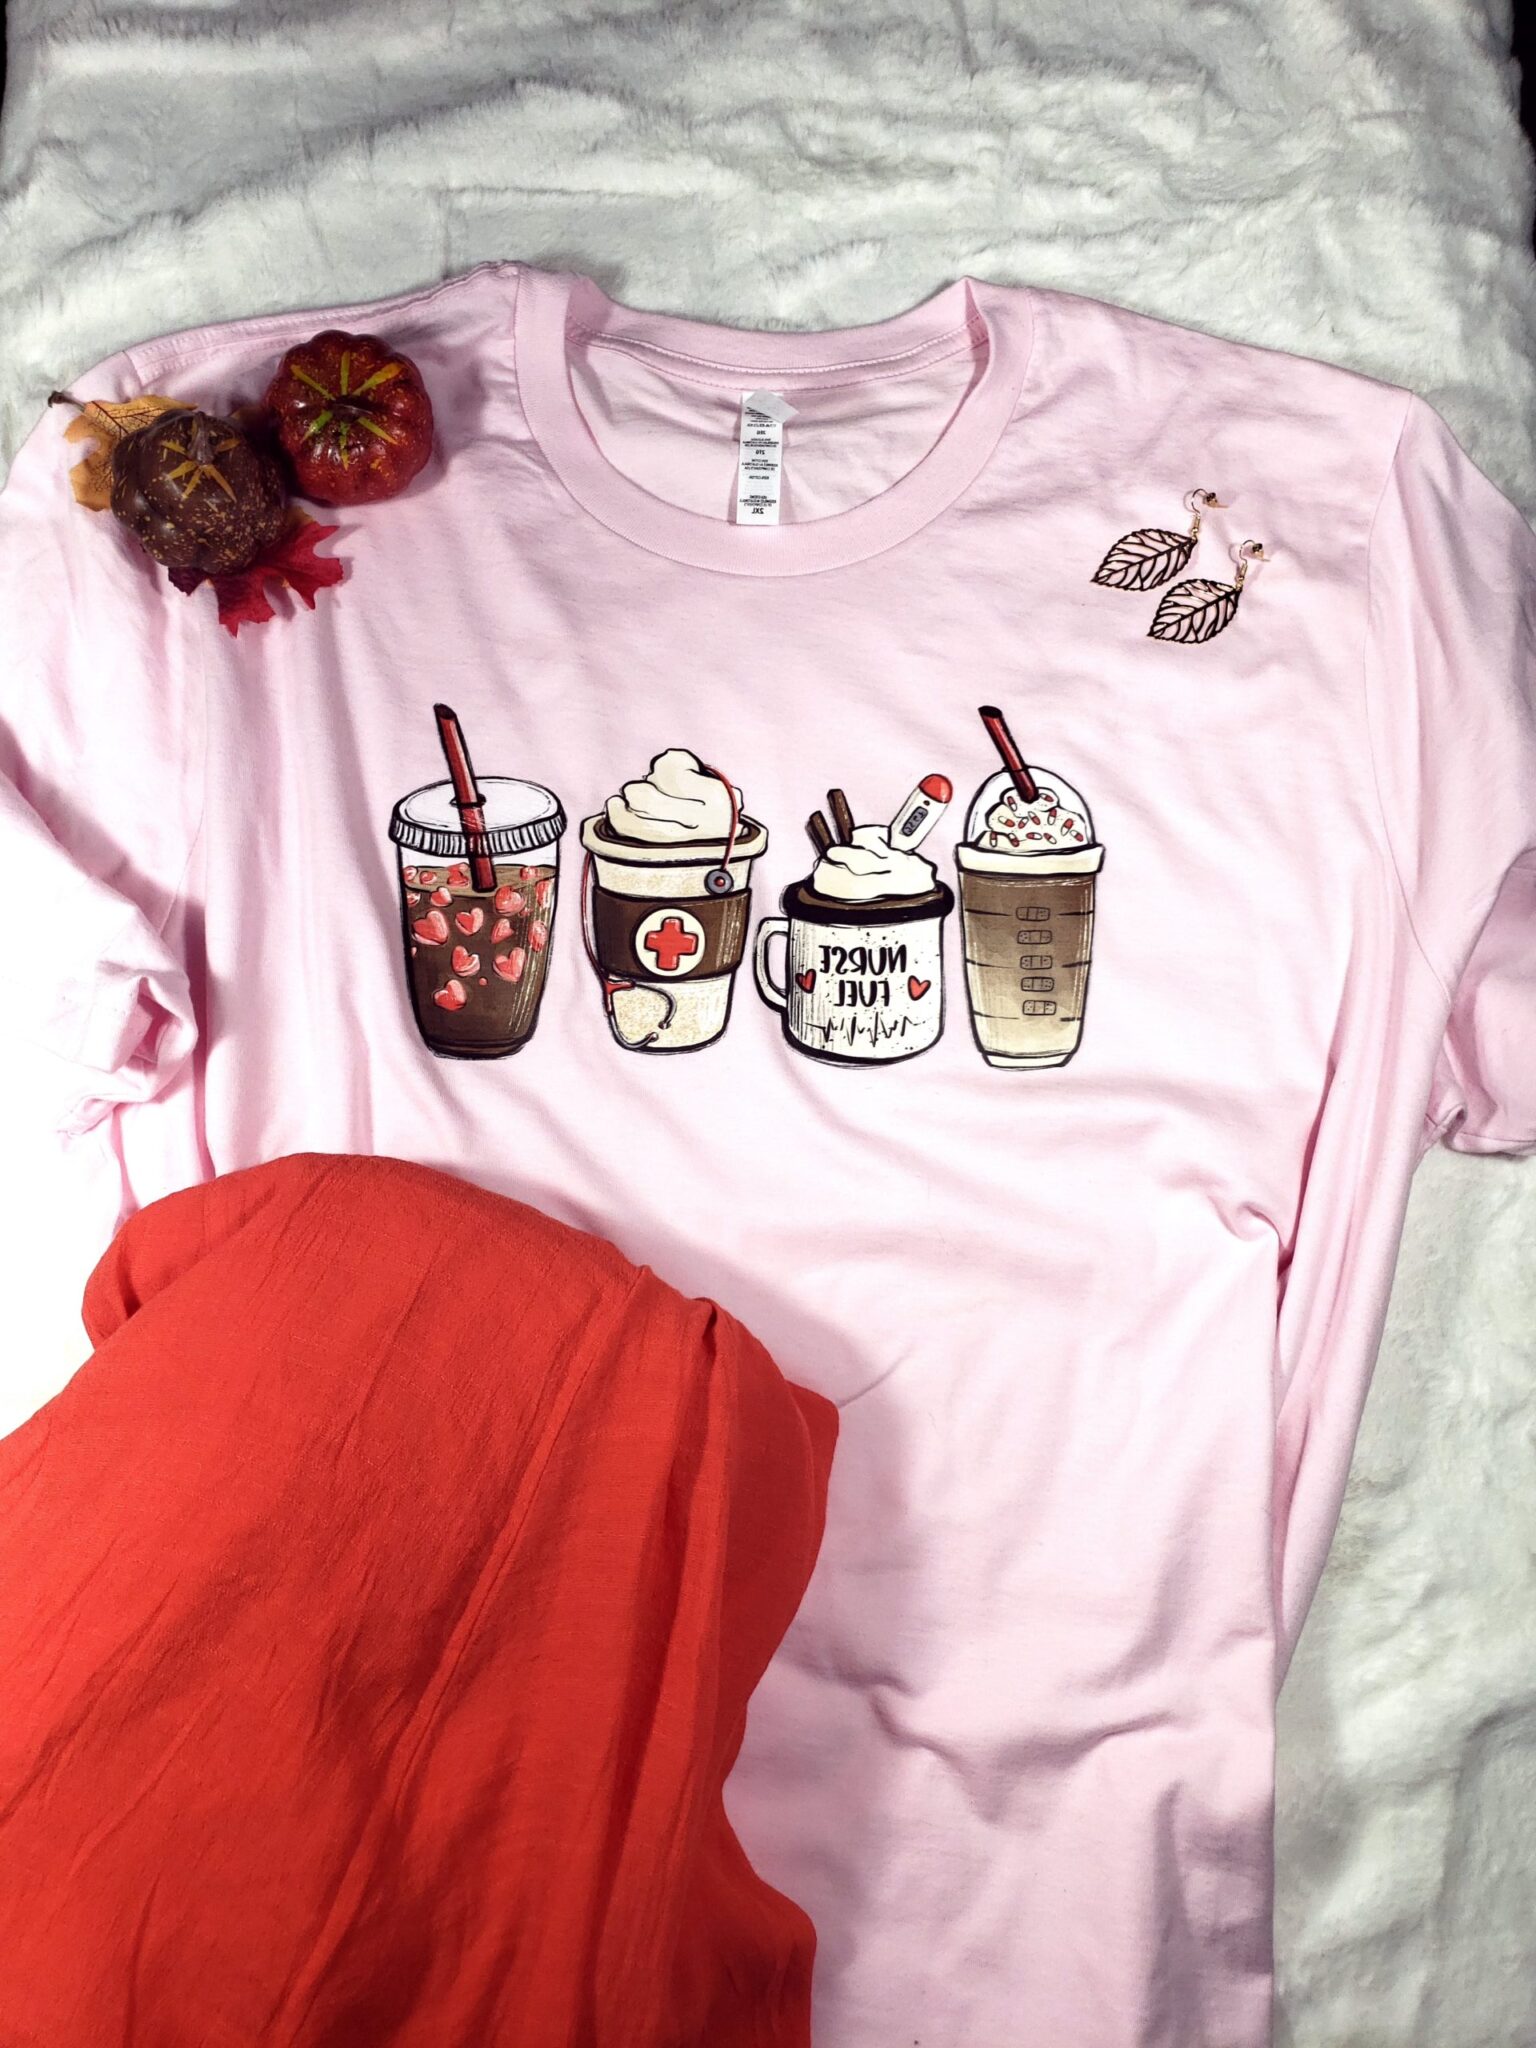 Pale pink tee with coffee cups, tangerine skirt, gold leaf earrings